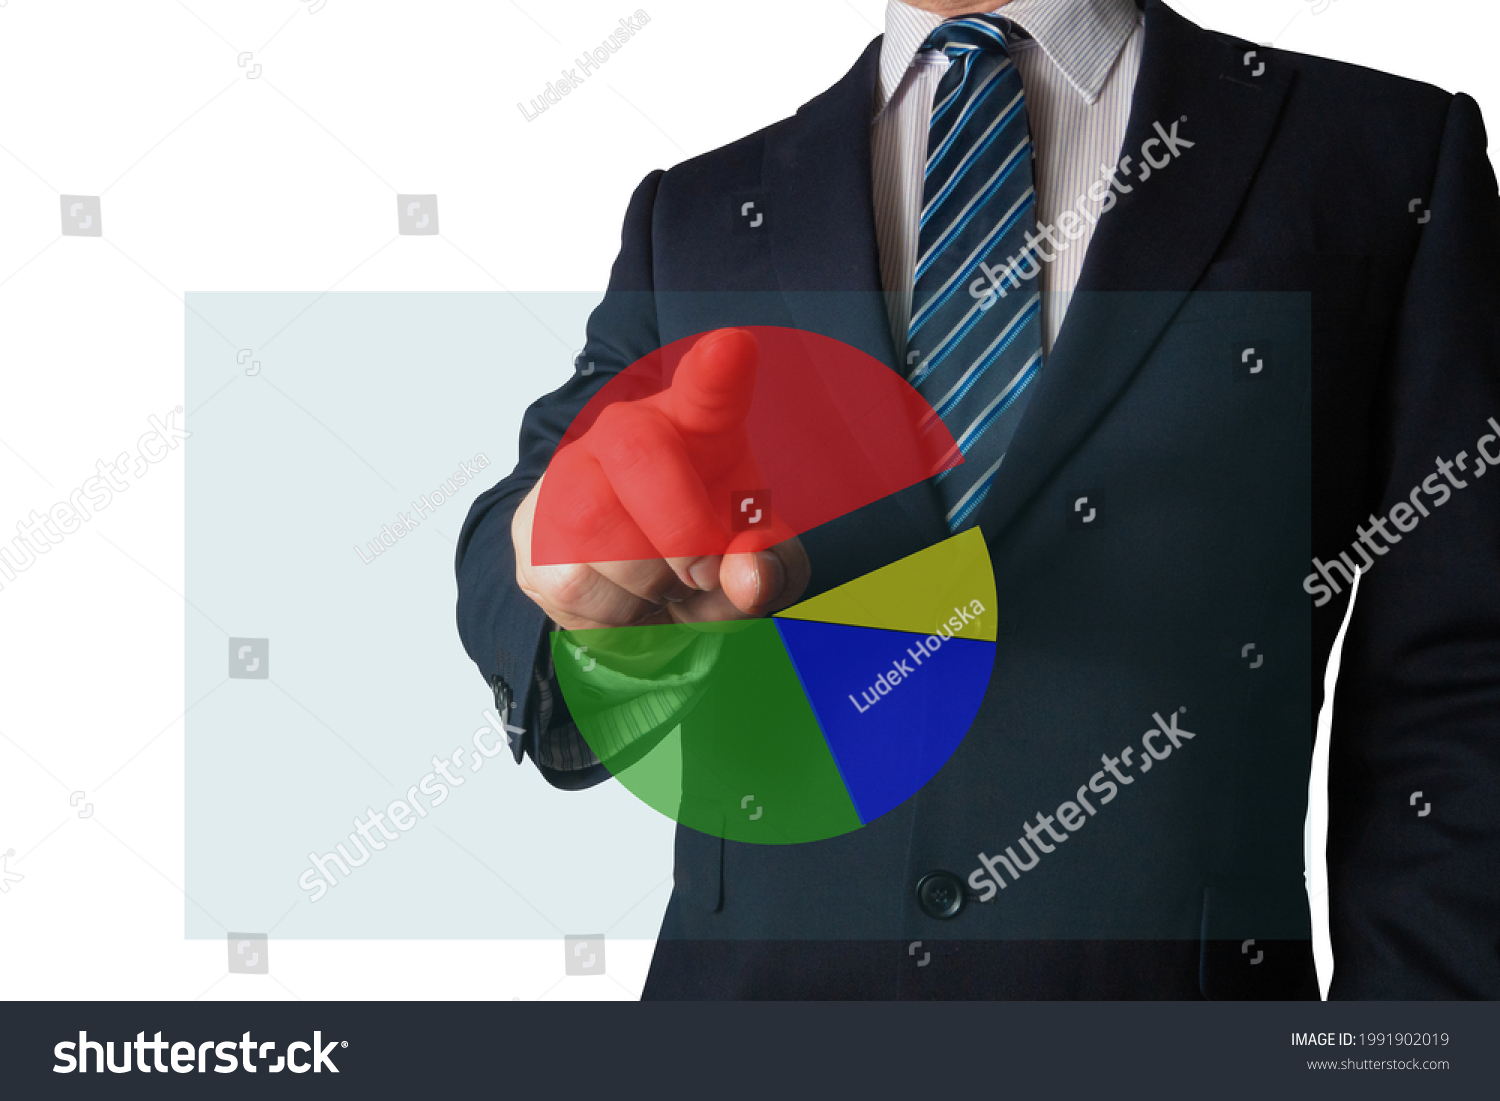 Analyst pointing at a pie chart illustrating market share, sales volume by category, or showing contributing factors or composition of a certain business phenomenon. #1991902019